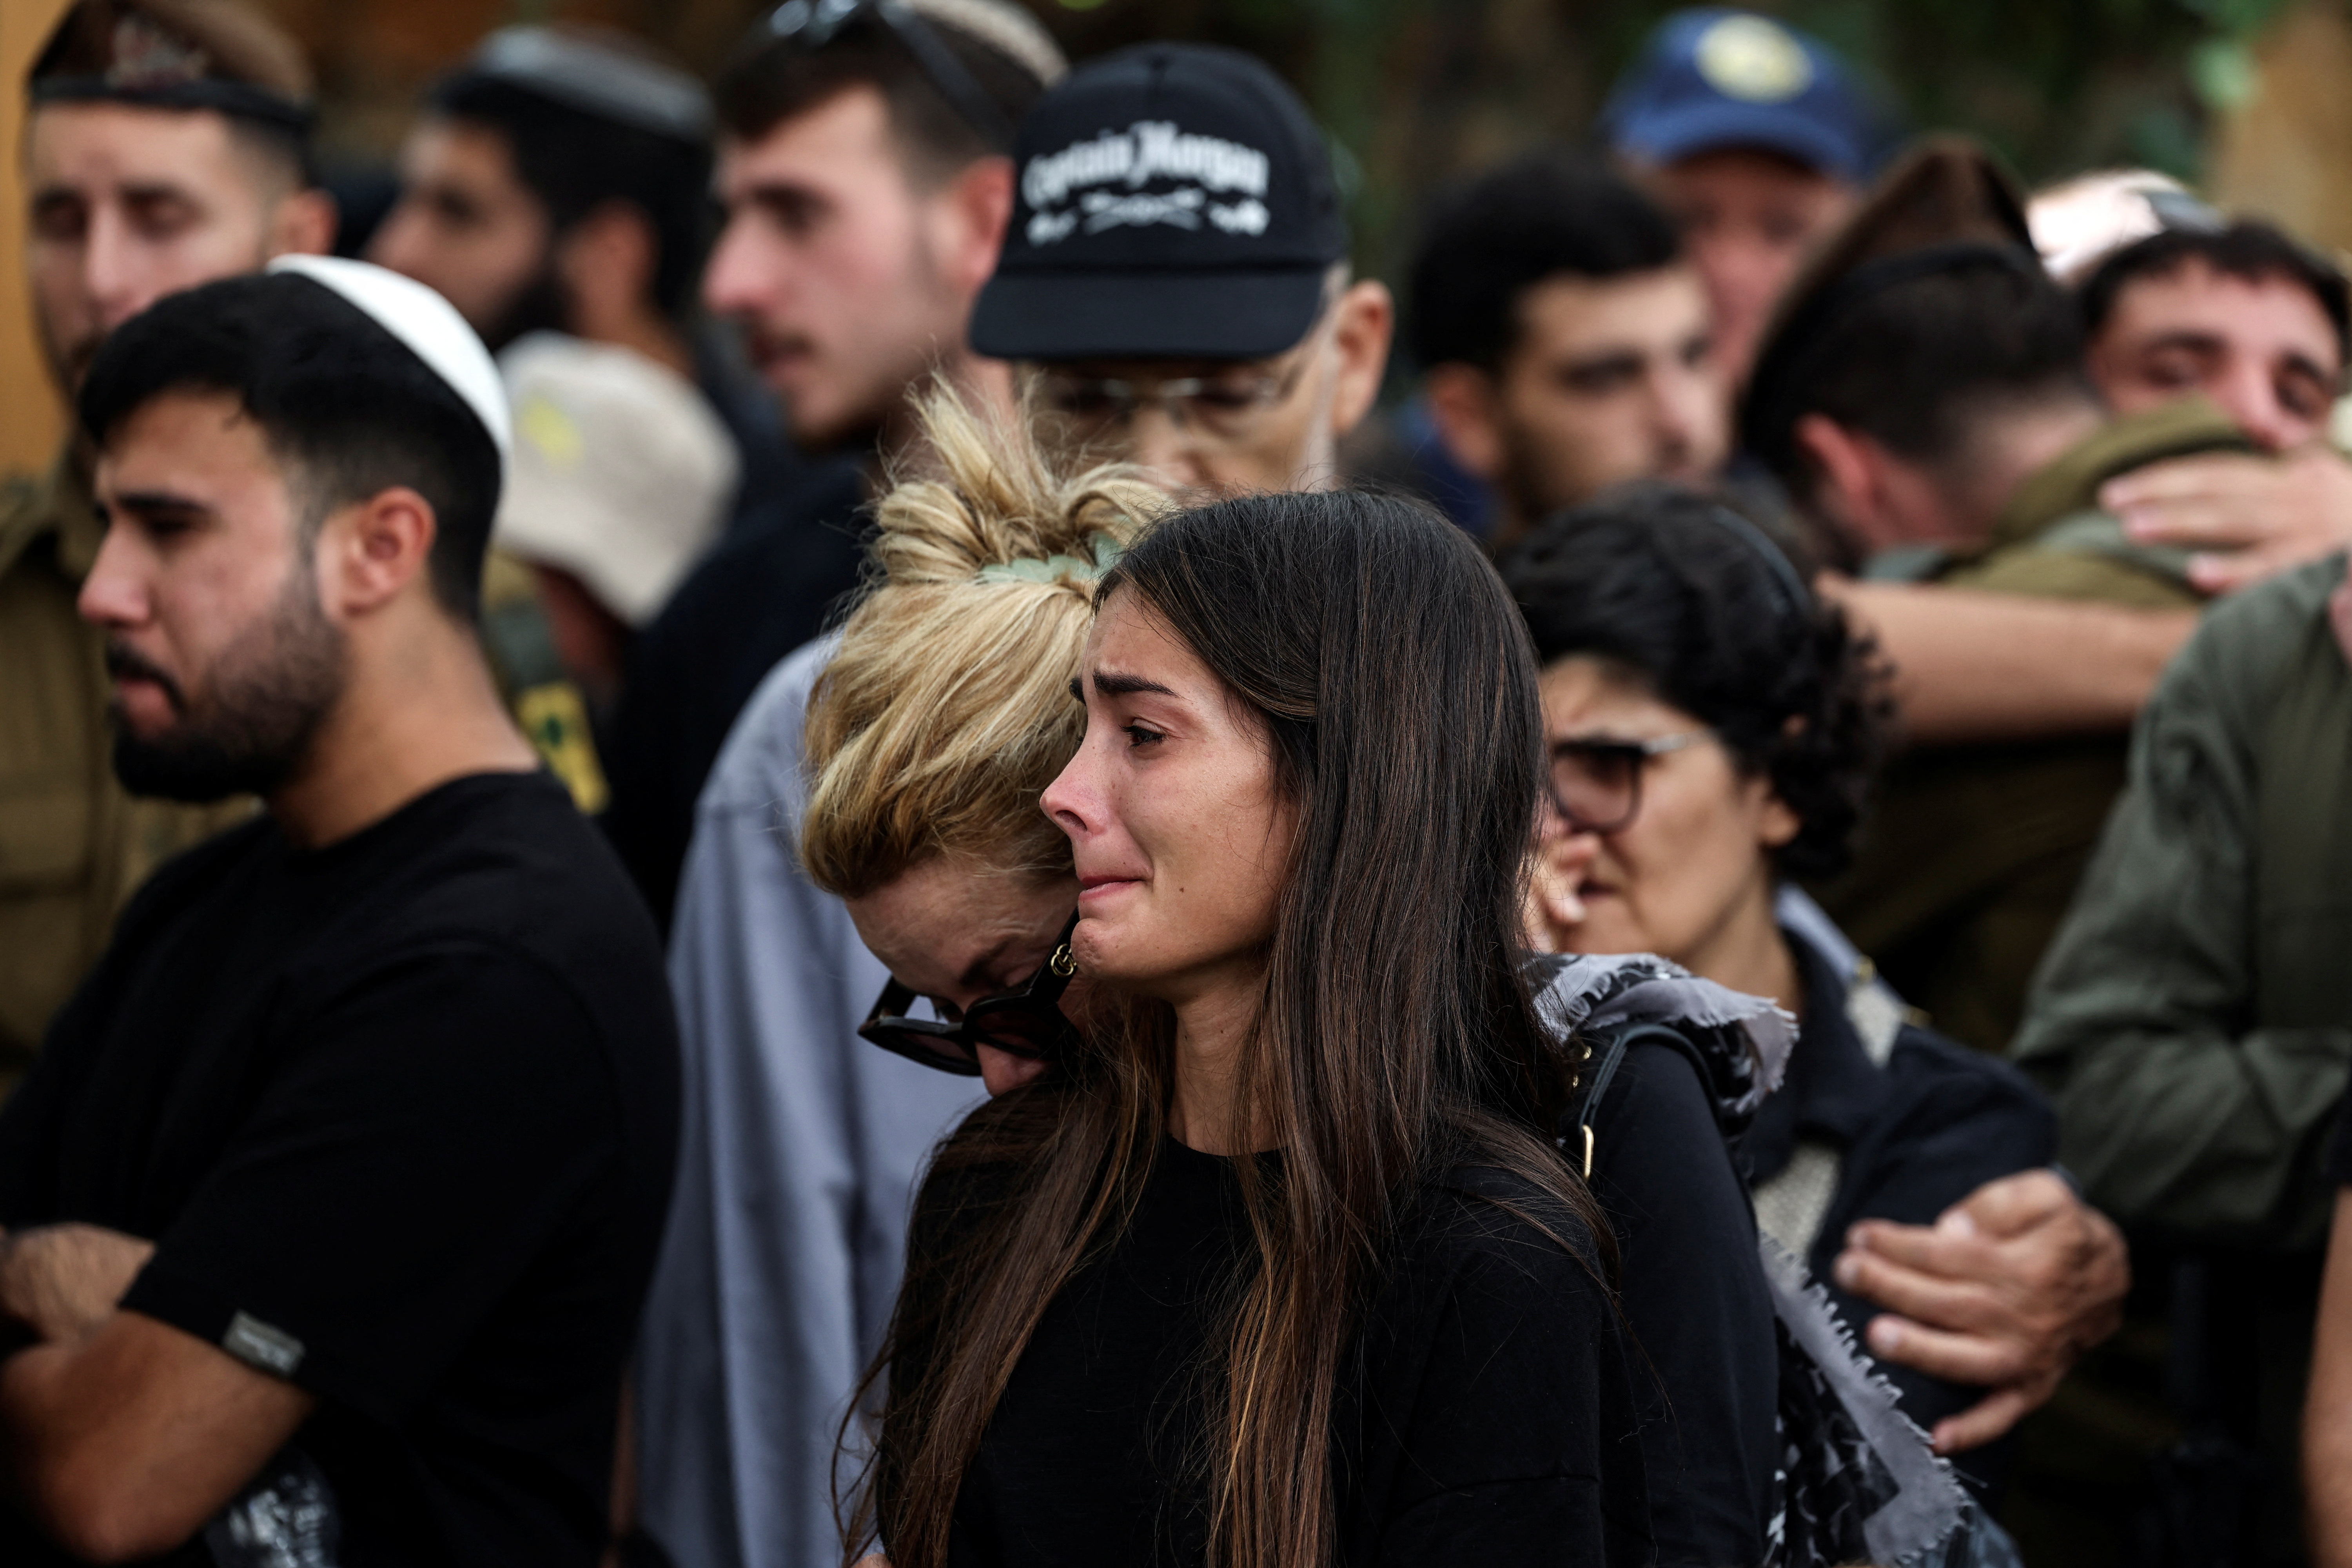 People mourn Adi Zur, a soldier who was slain in the assault on Israel by Hamas gunmen from the Gaza Strip, at their funeral at Mount Herzl Military Cemetery in Jerusalem